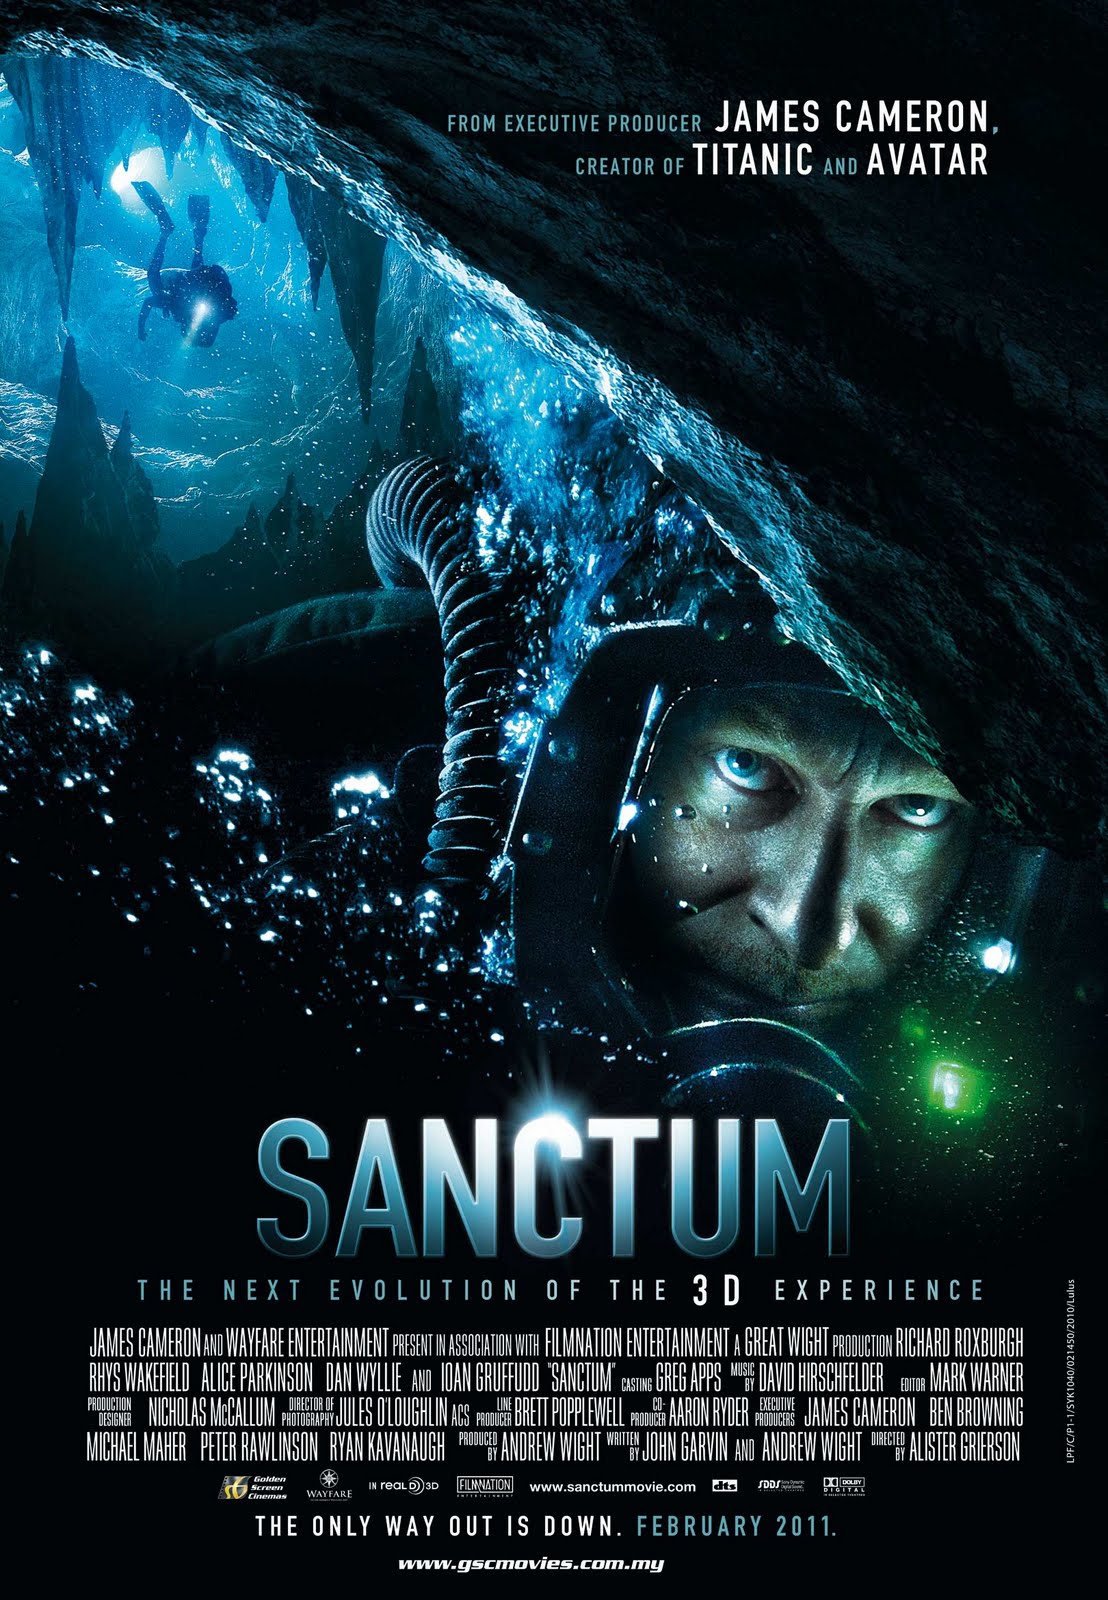 @ The Movies With Lim Chang Moh: James Cameron's Sanctum opens Feb 17